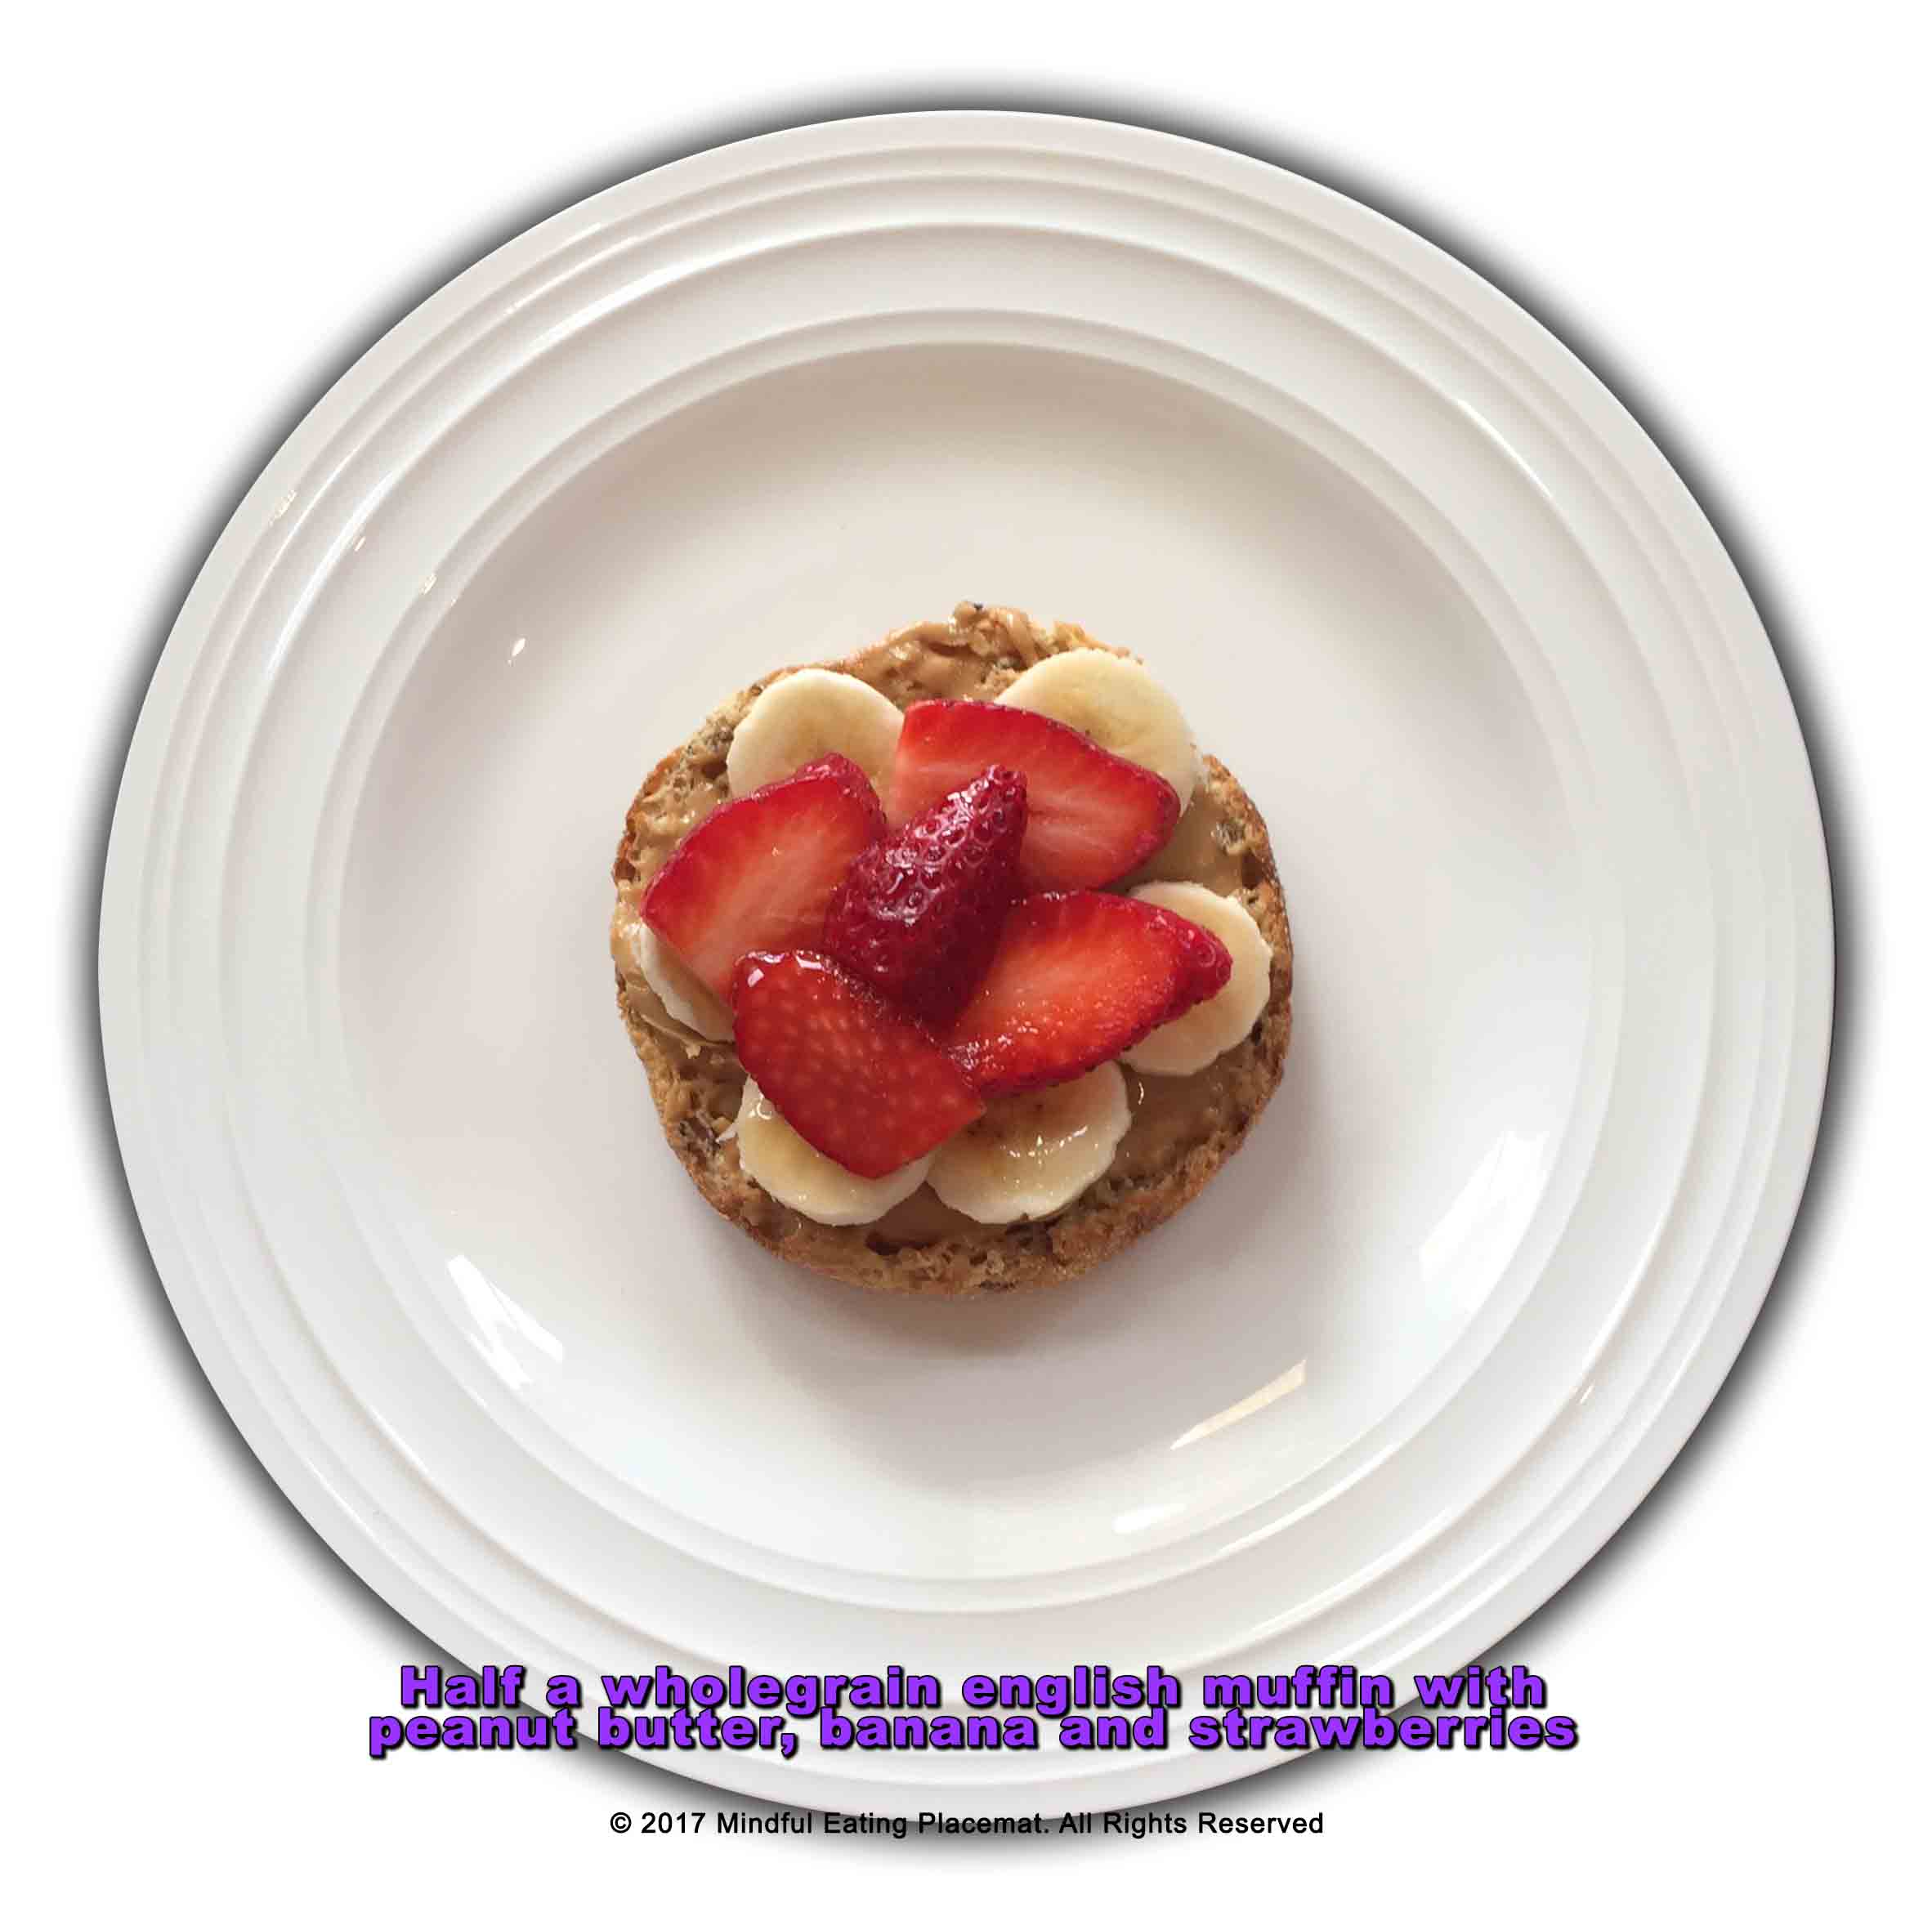 Wholegrain muffin with peanut butter, banana and strawberry